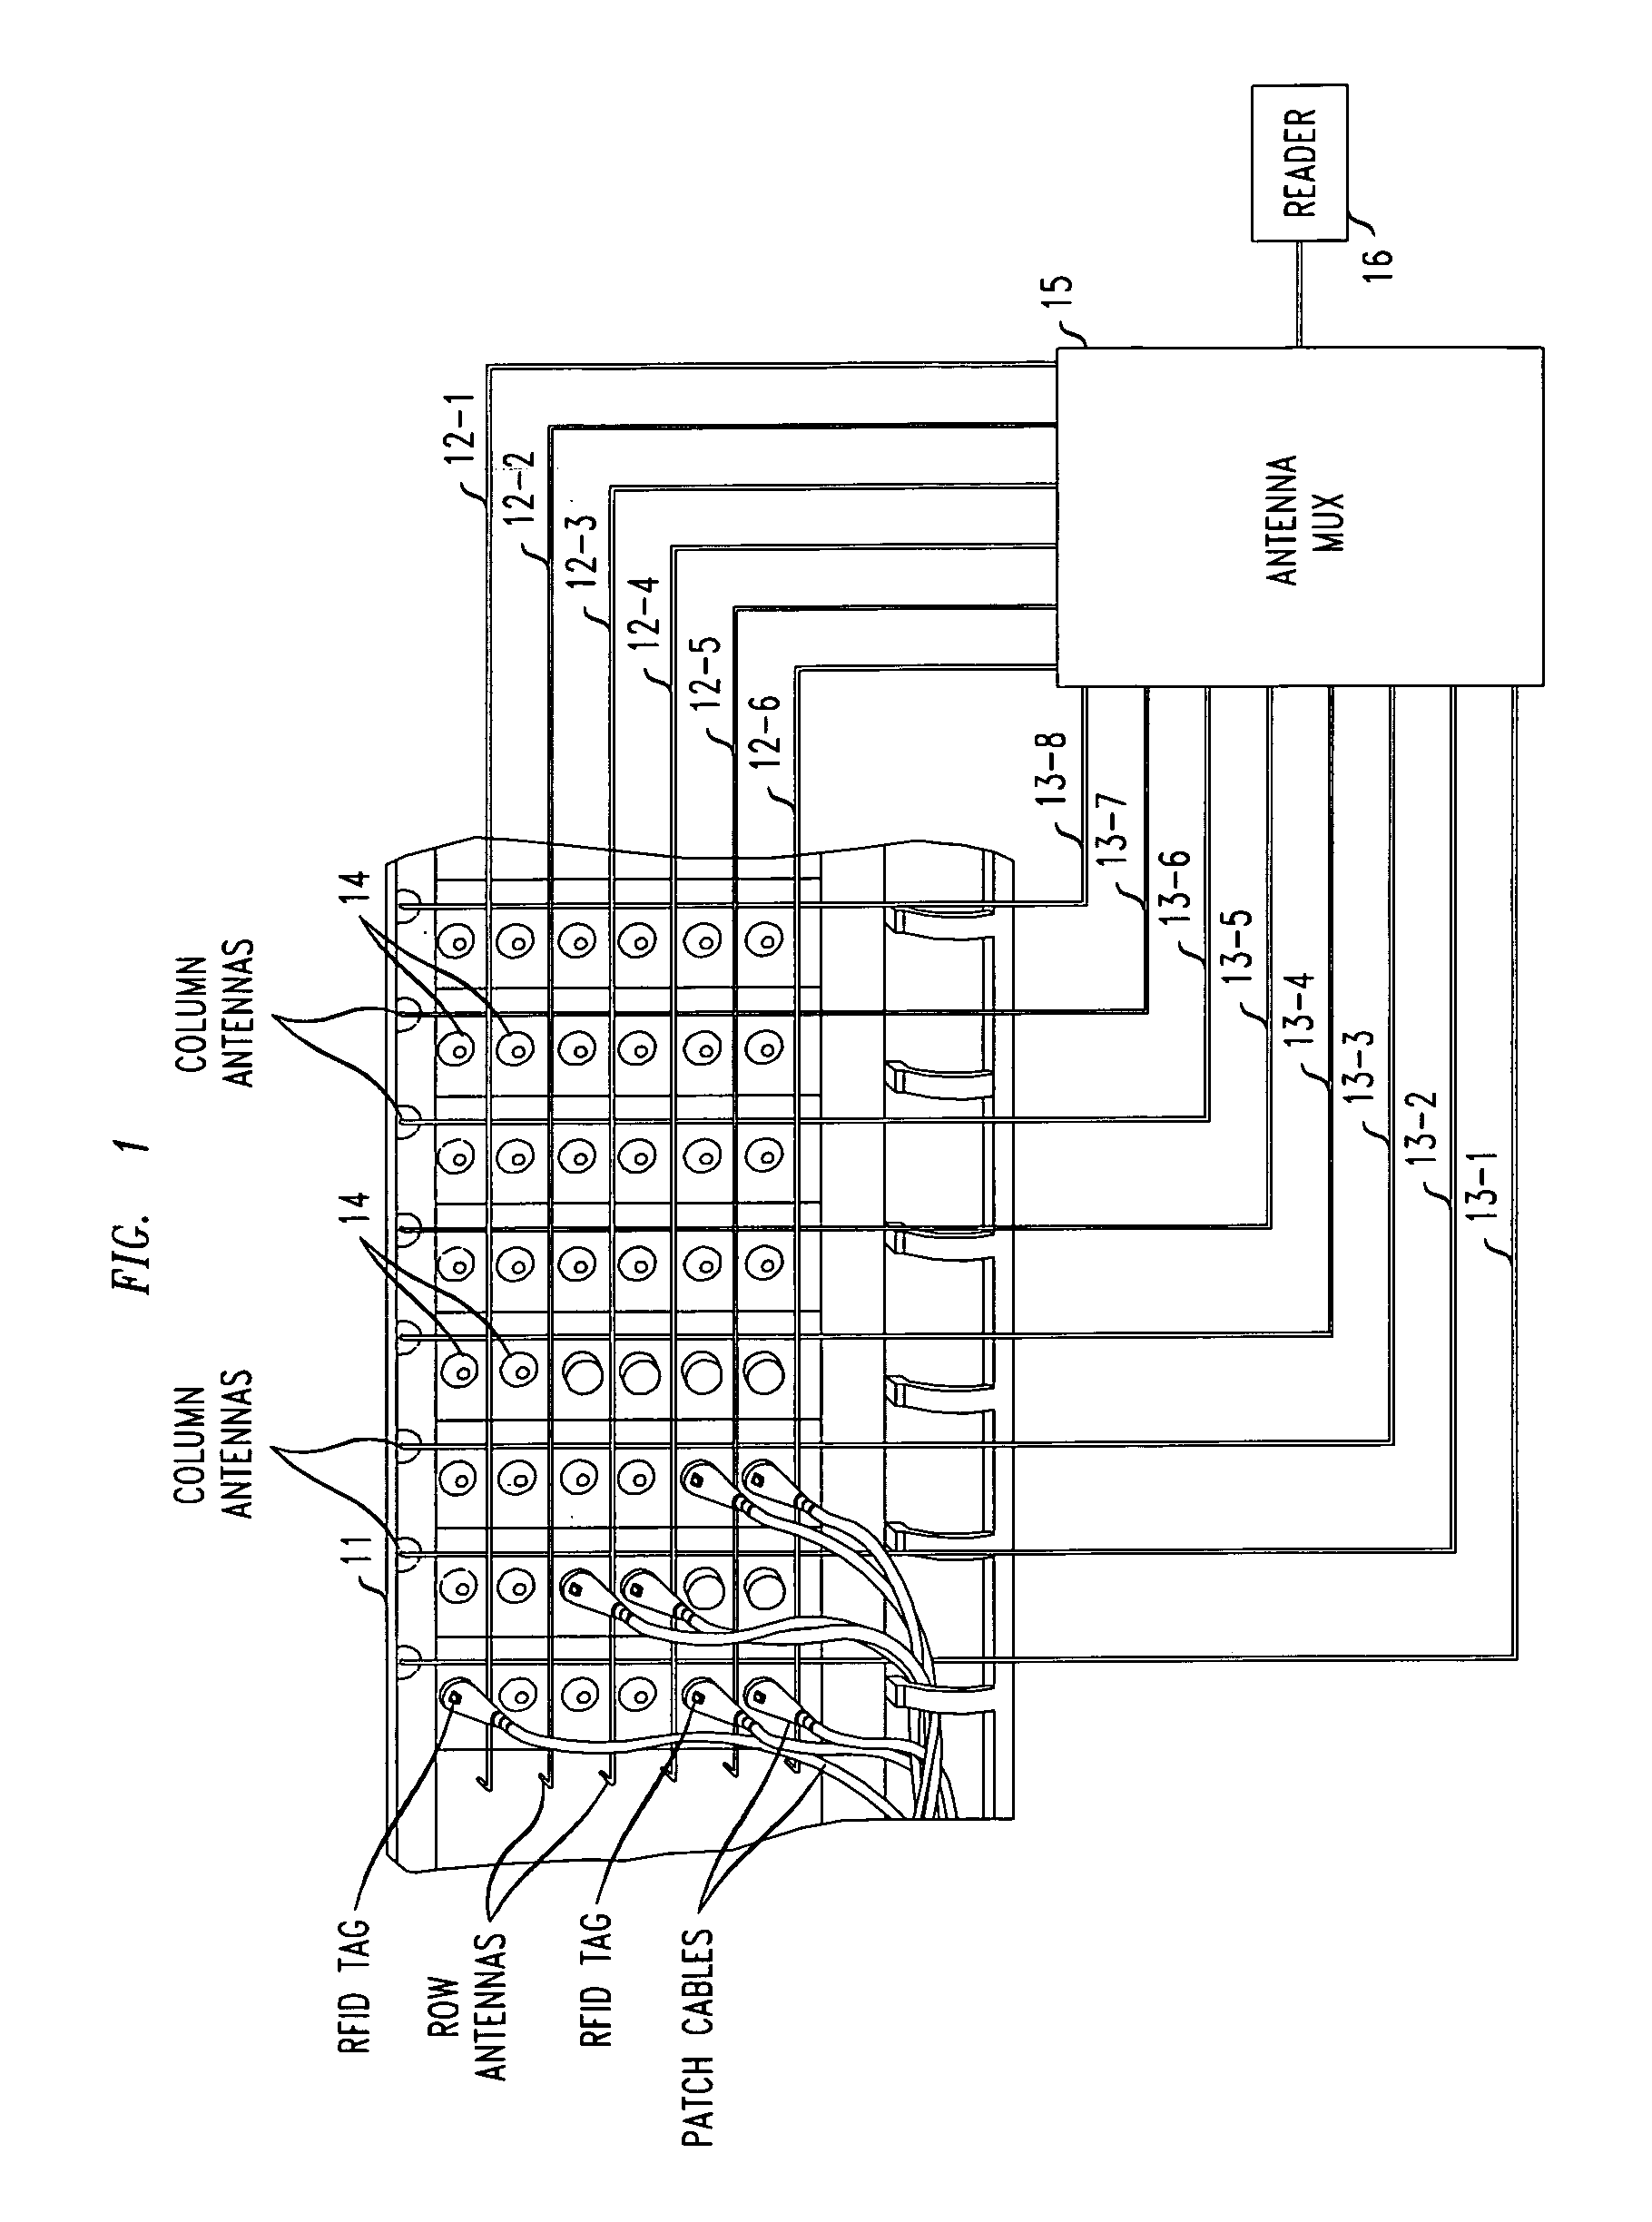 Method and apparatus for the automatic determination of network cable connections using RFID tags and an antenna grid